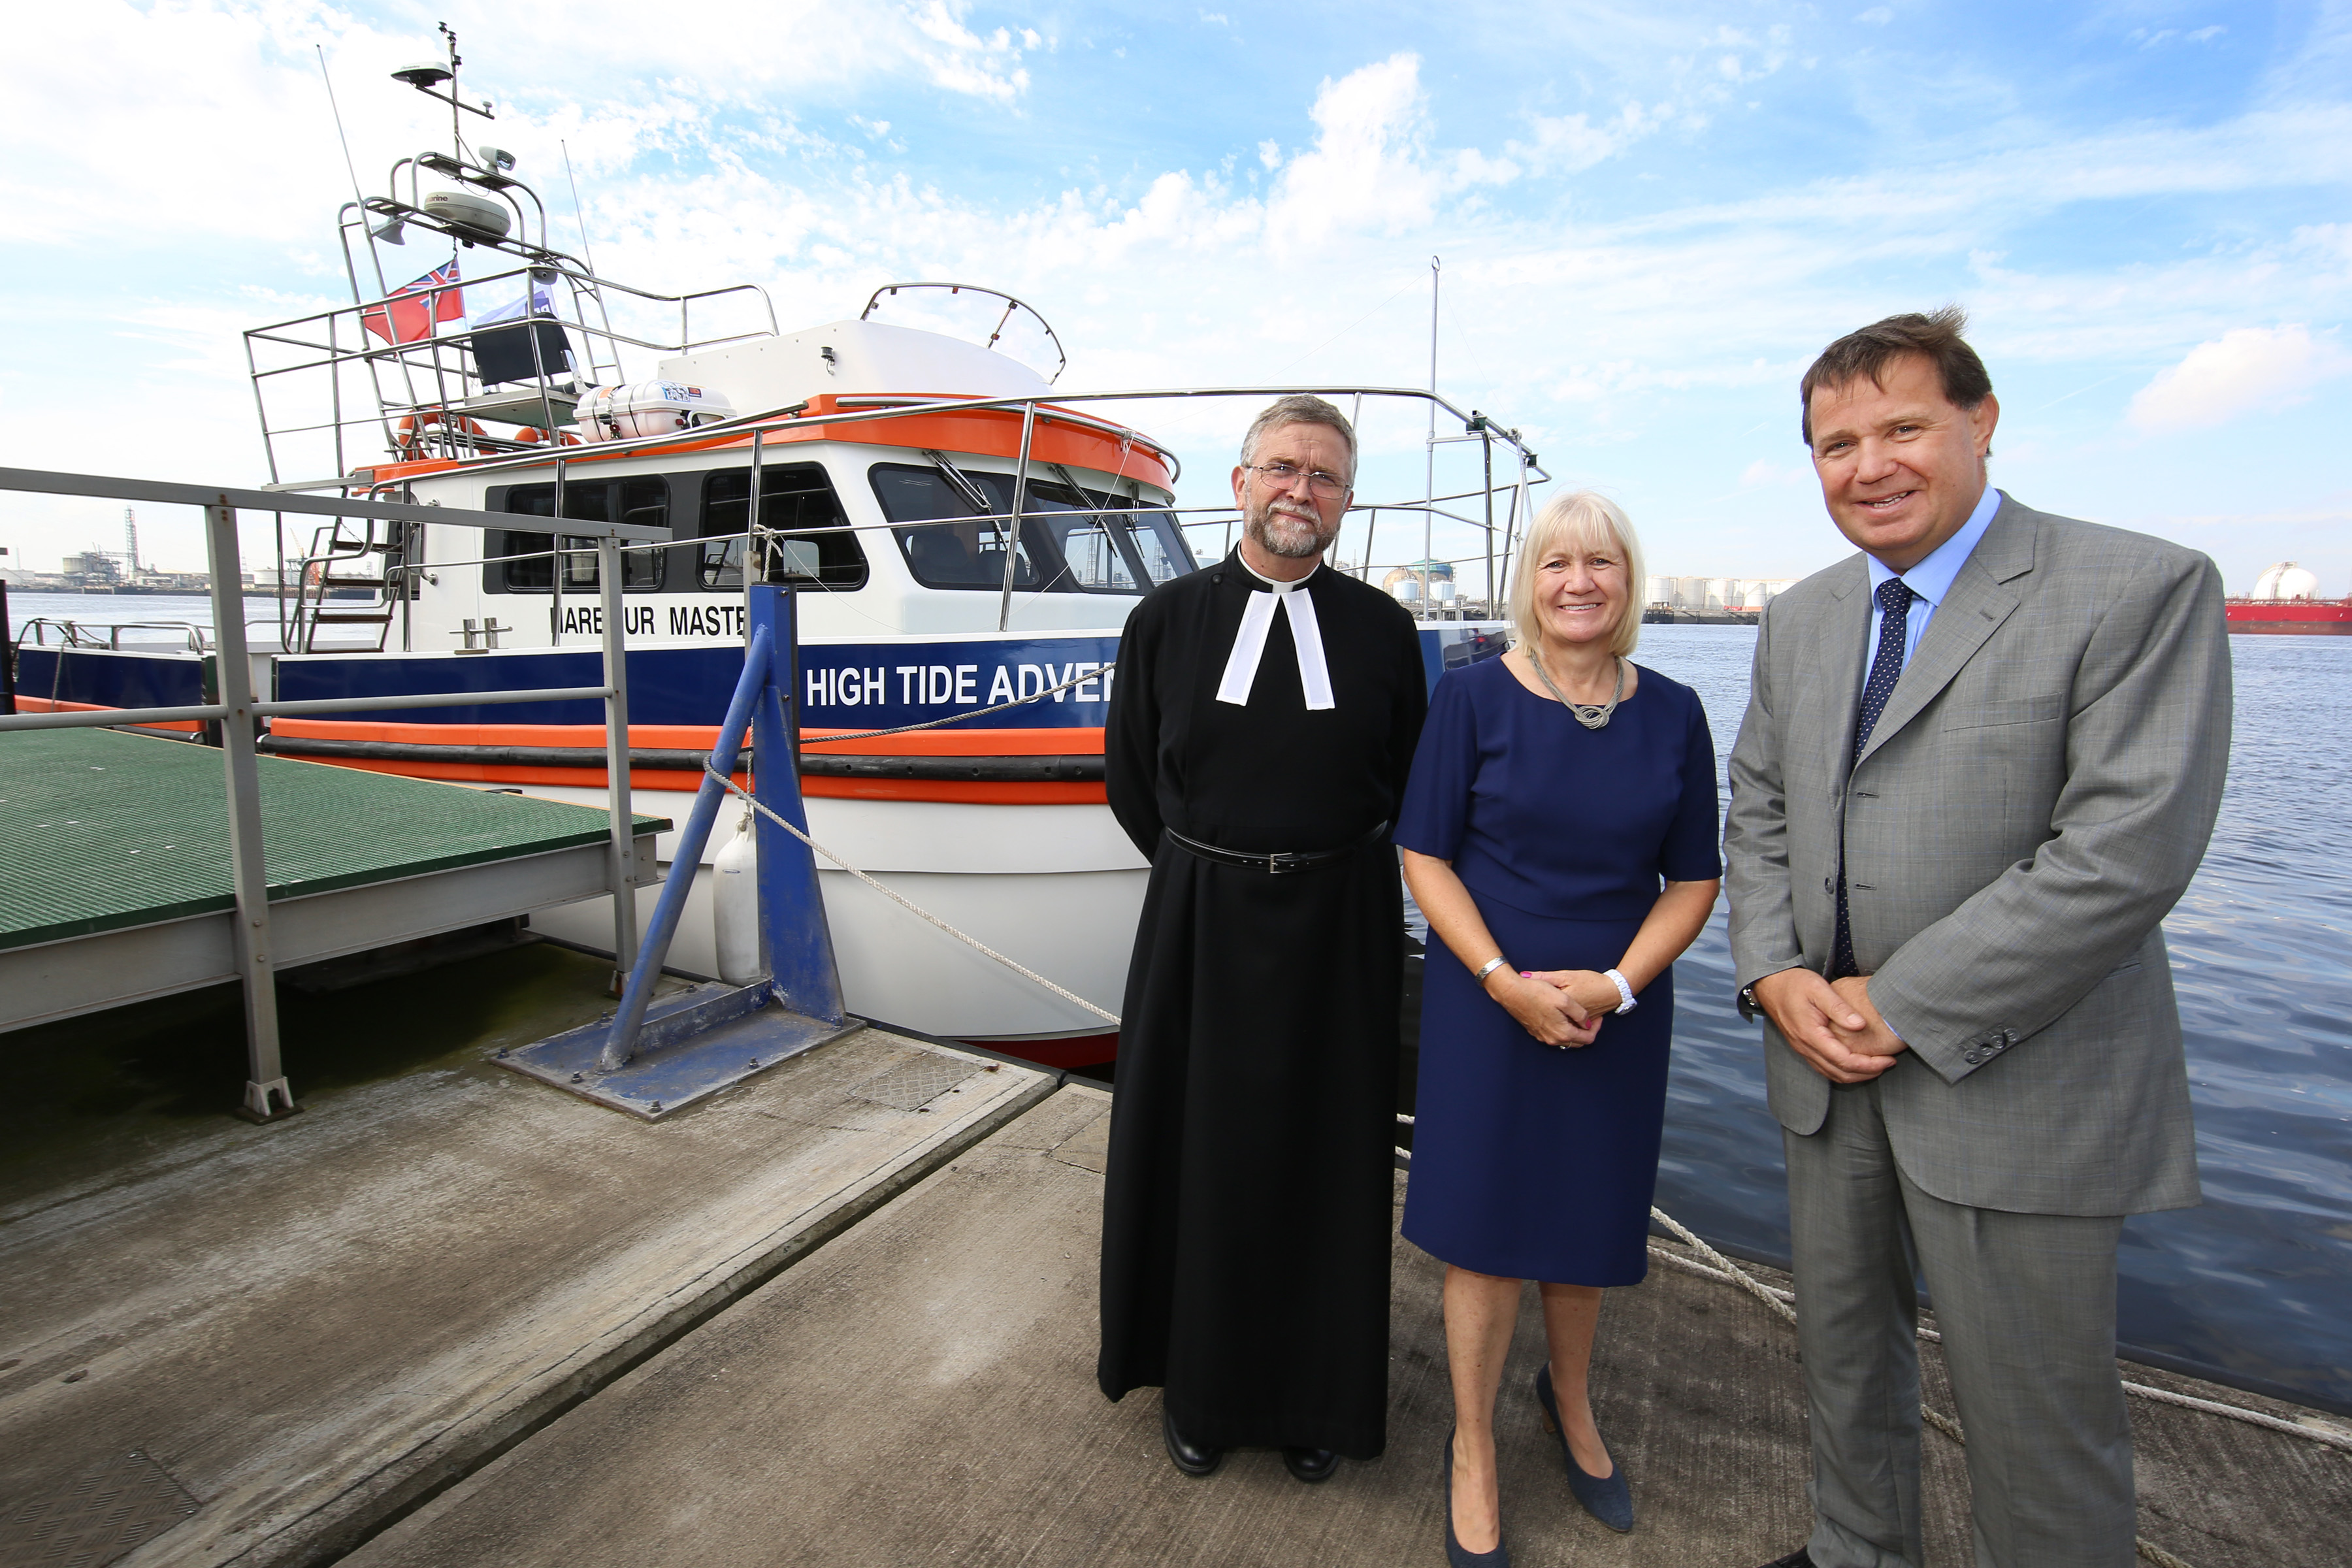 Taken: 23rd August 2016 Redcar & Clkeveland Council Sue Jeffrey naming ceremony for one of our new vesselswith PD Ports. Photographer/Byline Dave Charnley Photography  www.davecharnleyphotography.com